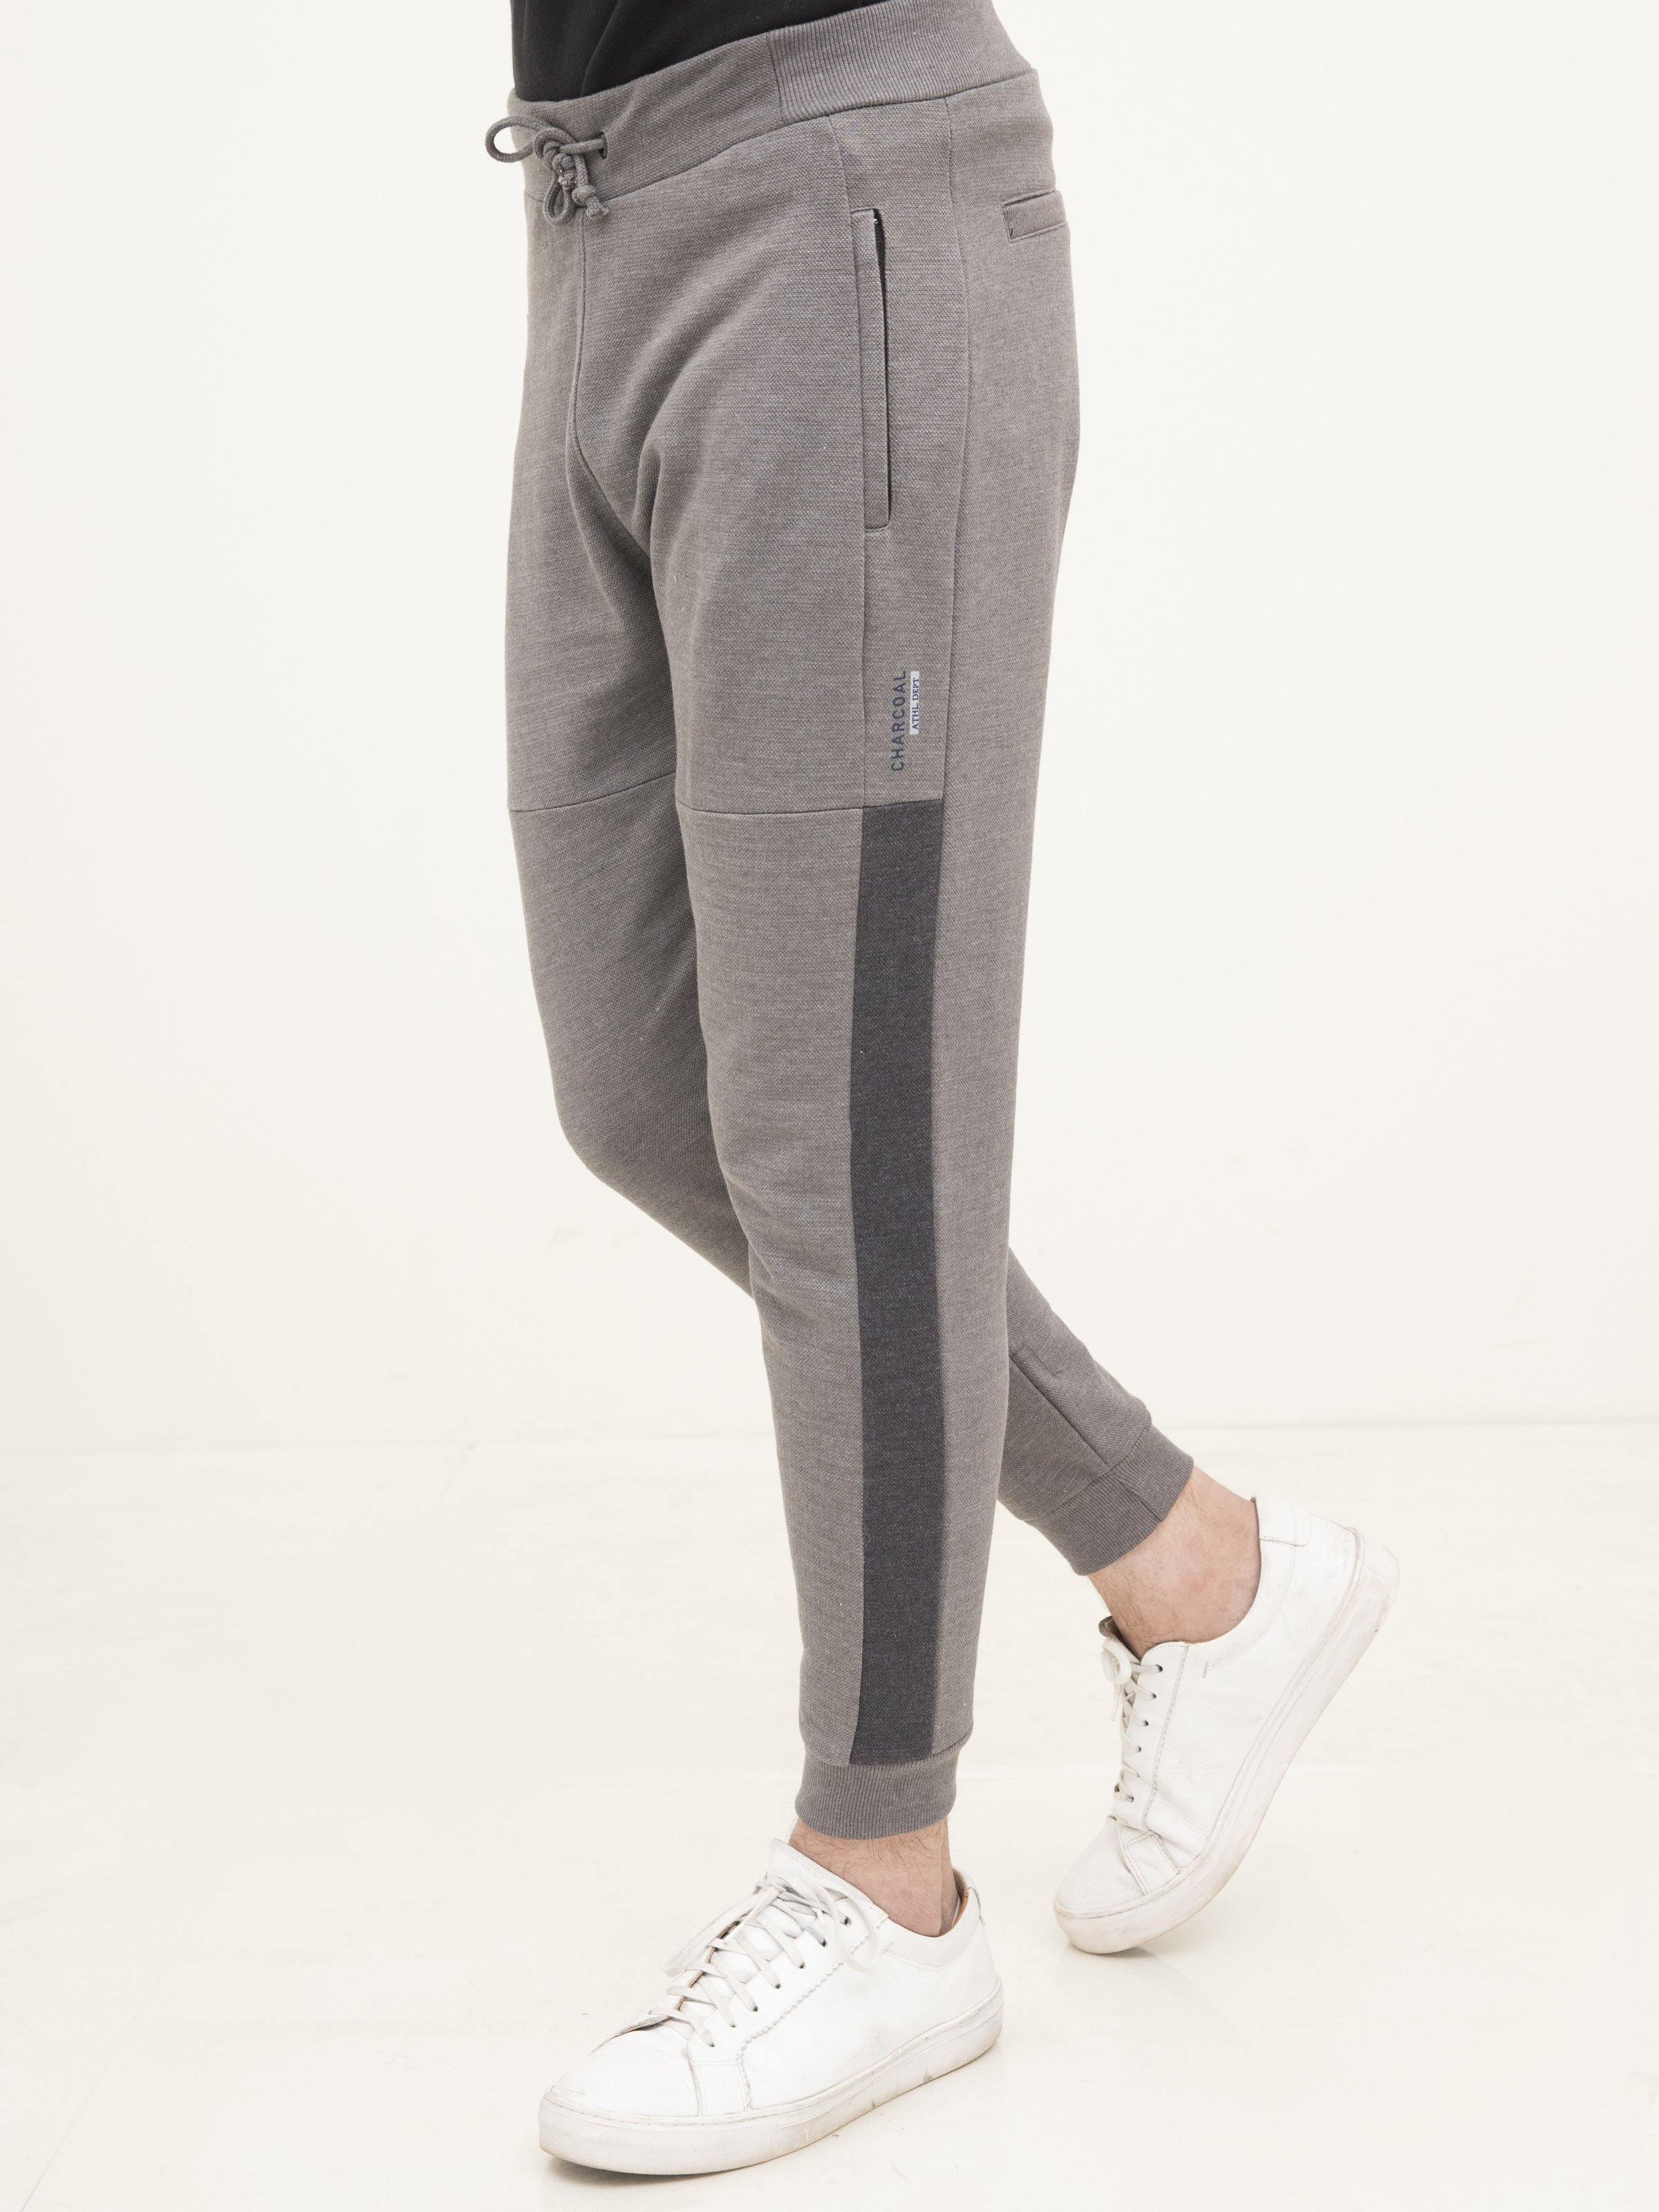 PIQUE FLEECE TROUSER LIGHT GREY at Charcoal Clothing